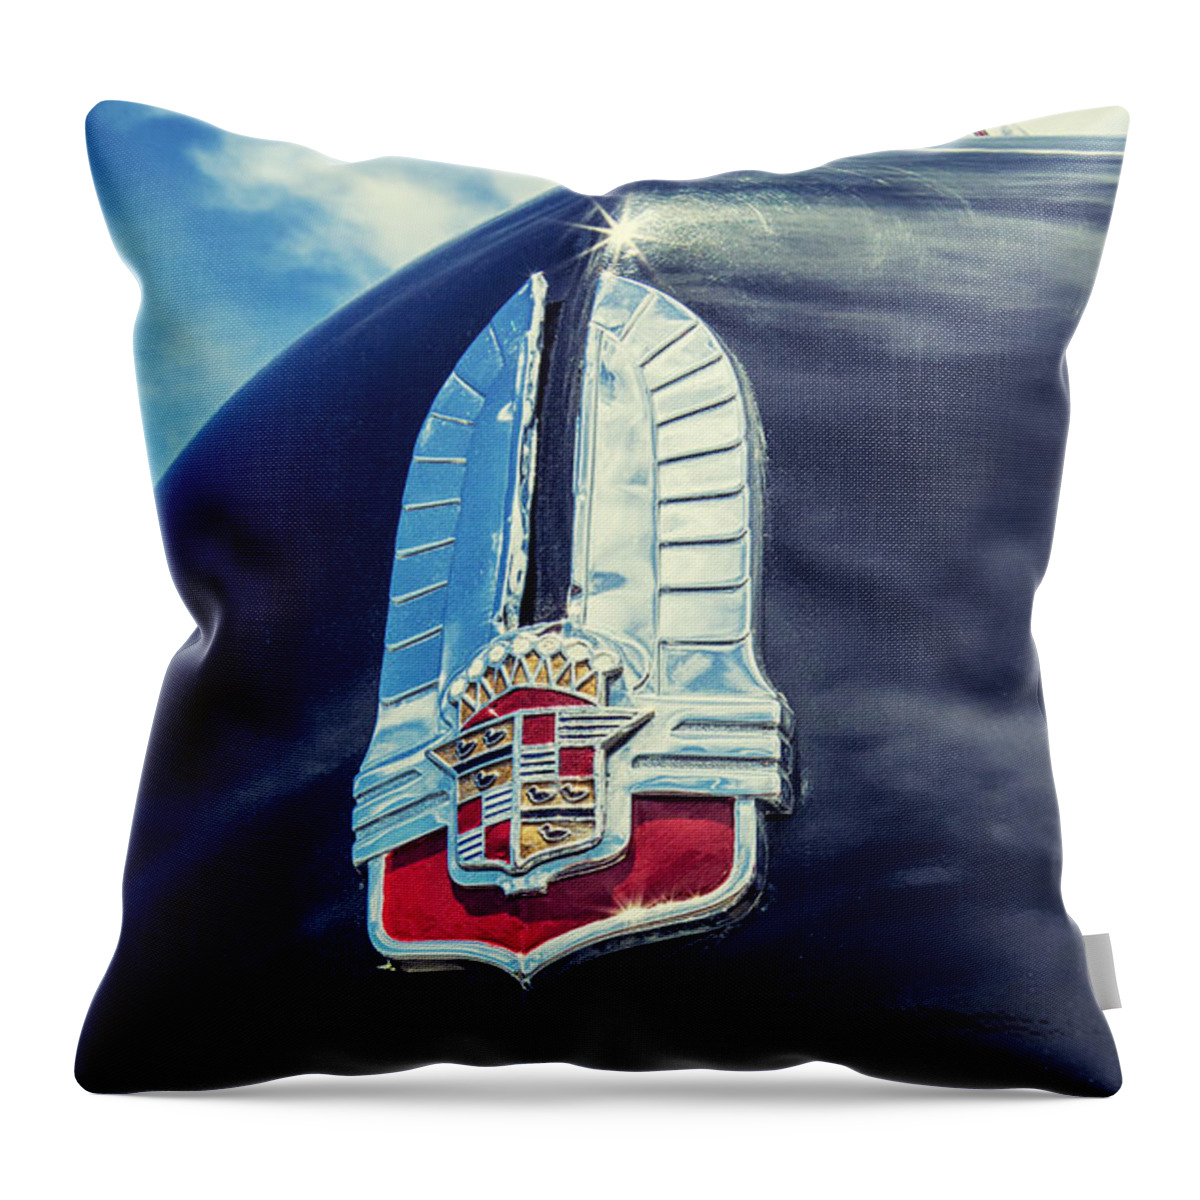 Cadillac Throw Pillow featuring the photograph Cadillac by Caitlyn Grasso